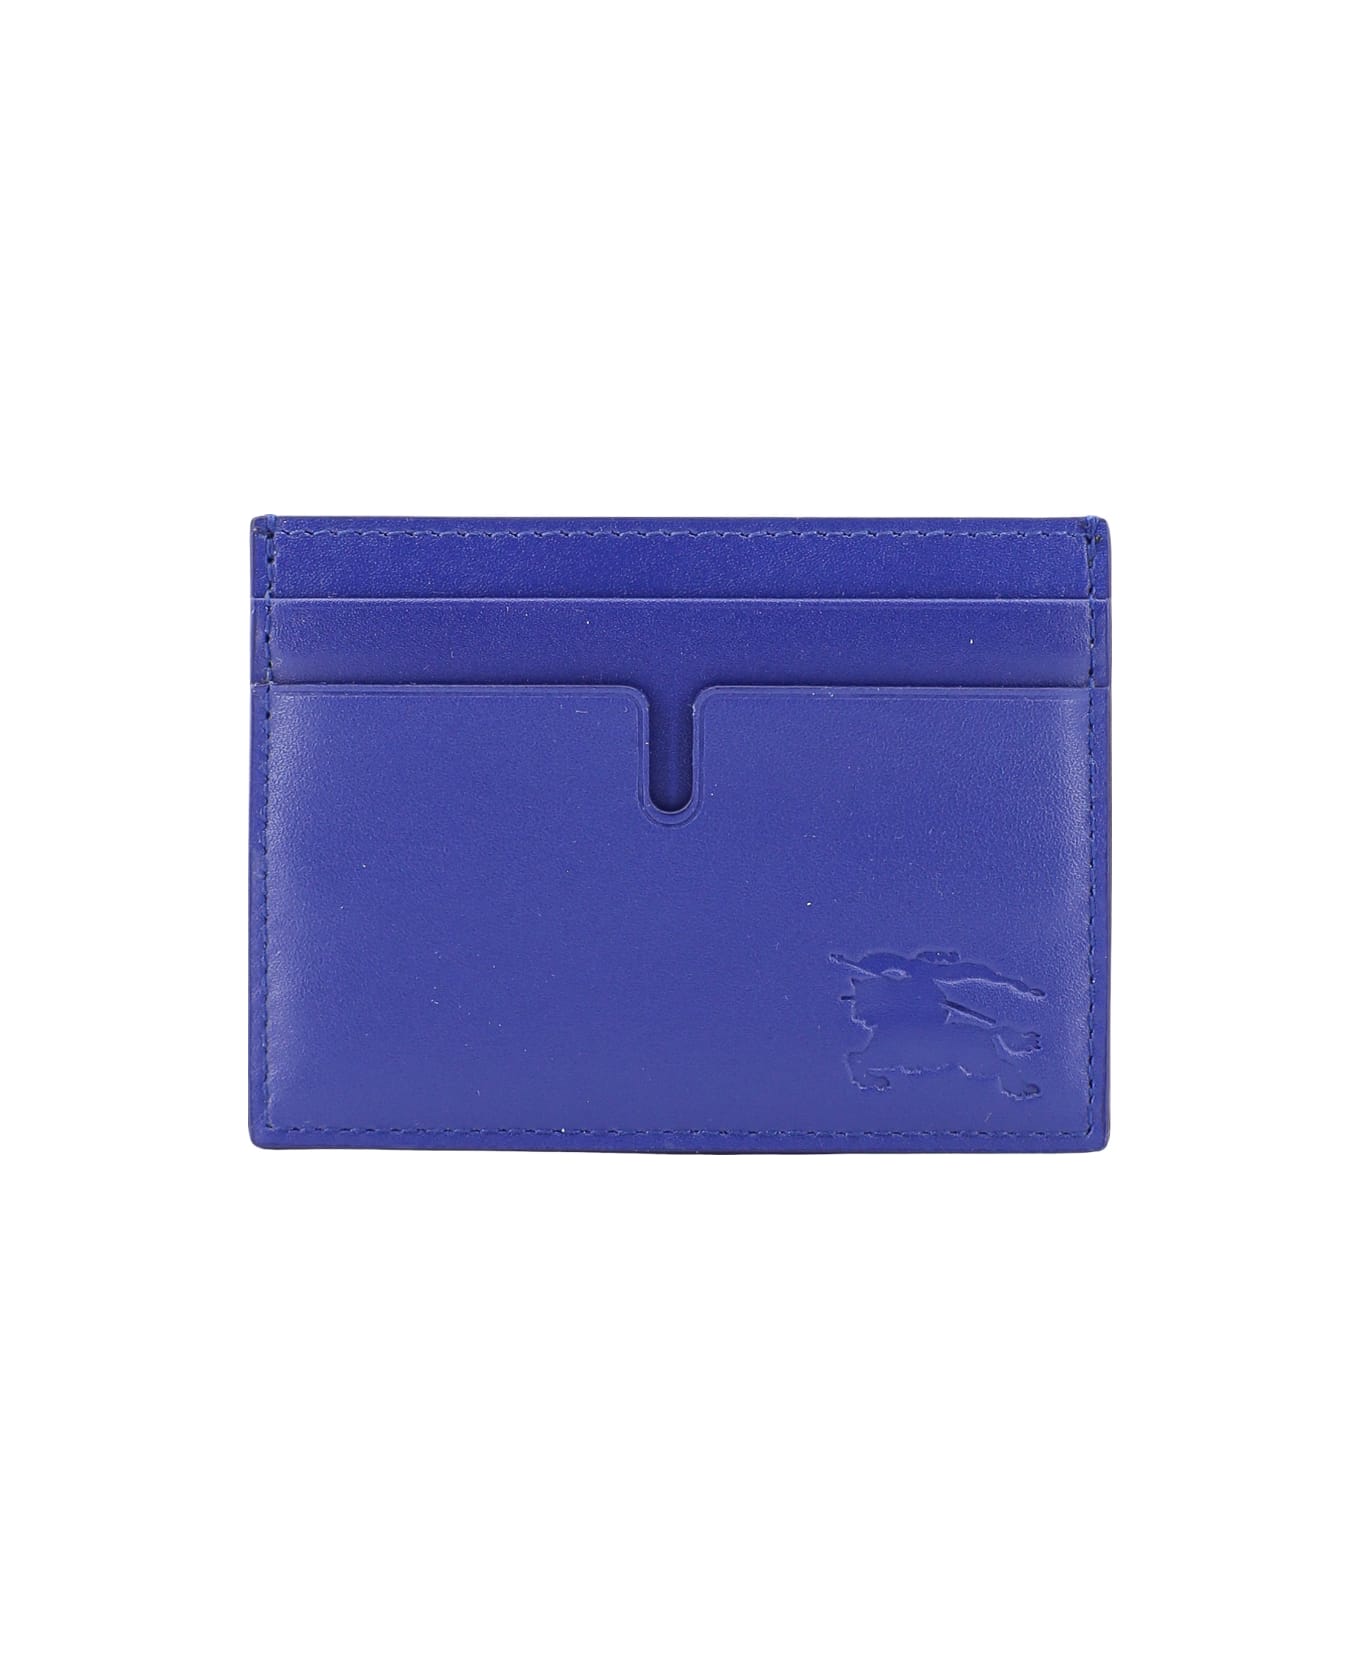 Burberry Horseferry 5 Slots Card Case - Blue